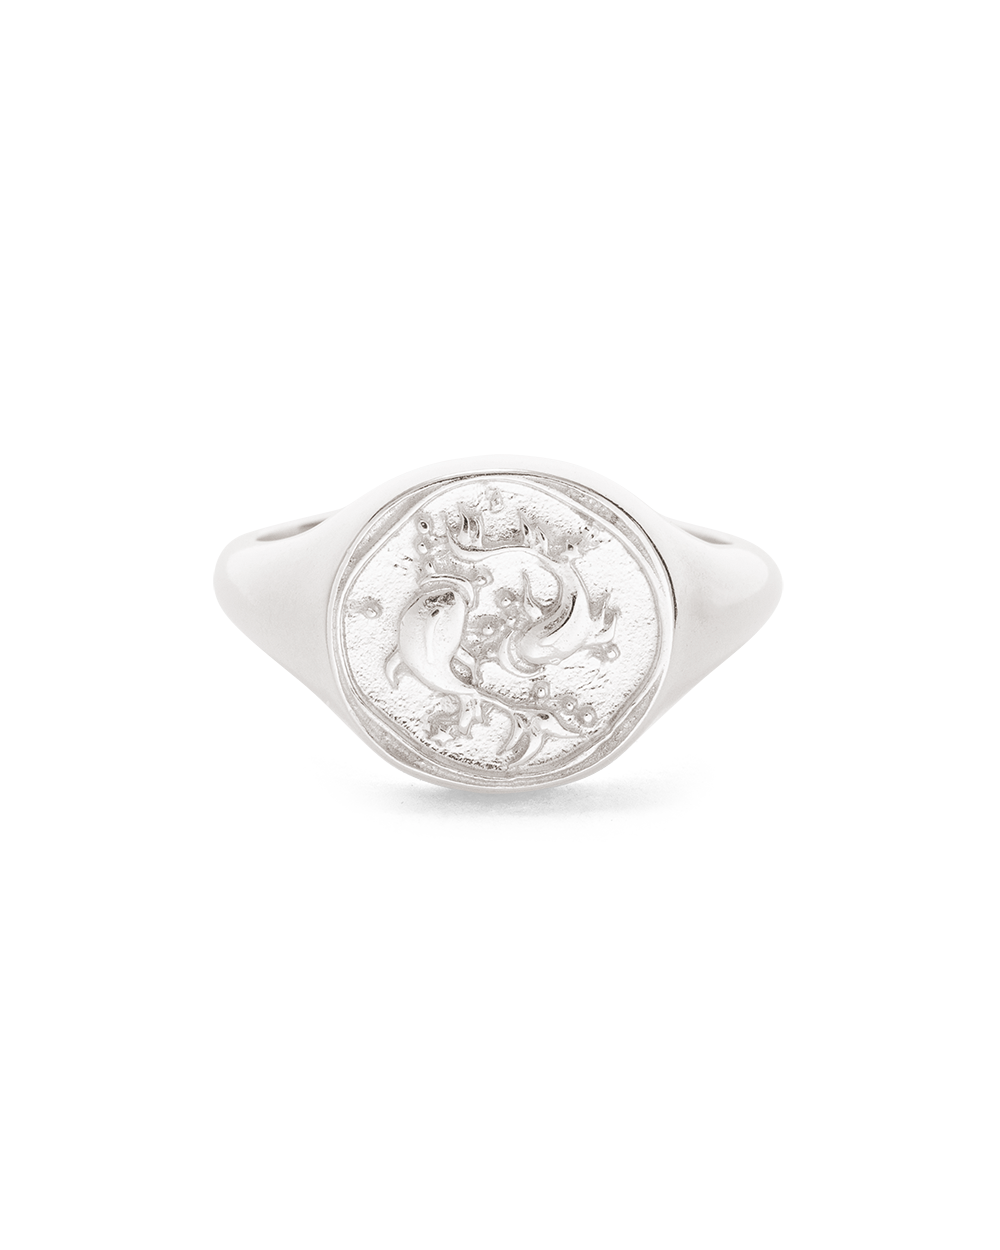 PISCES SIGNET RING (STERLING SILVER) - IMAGE 4